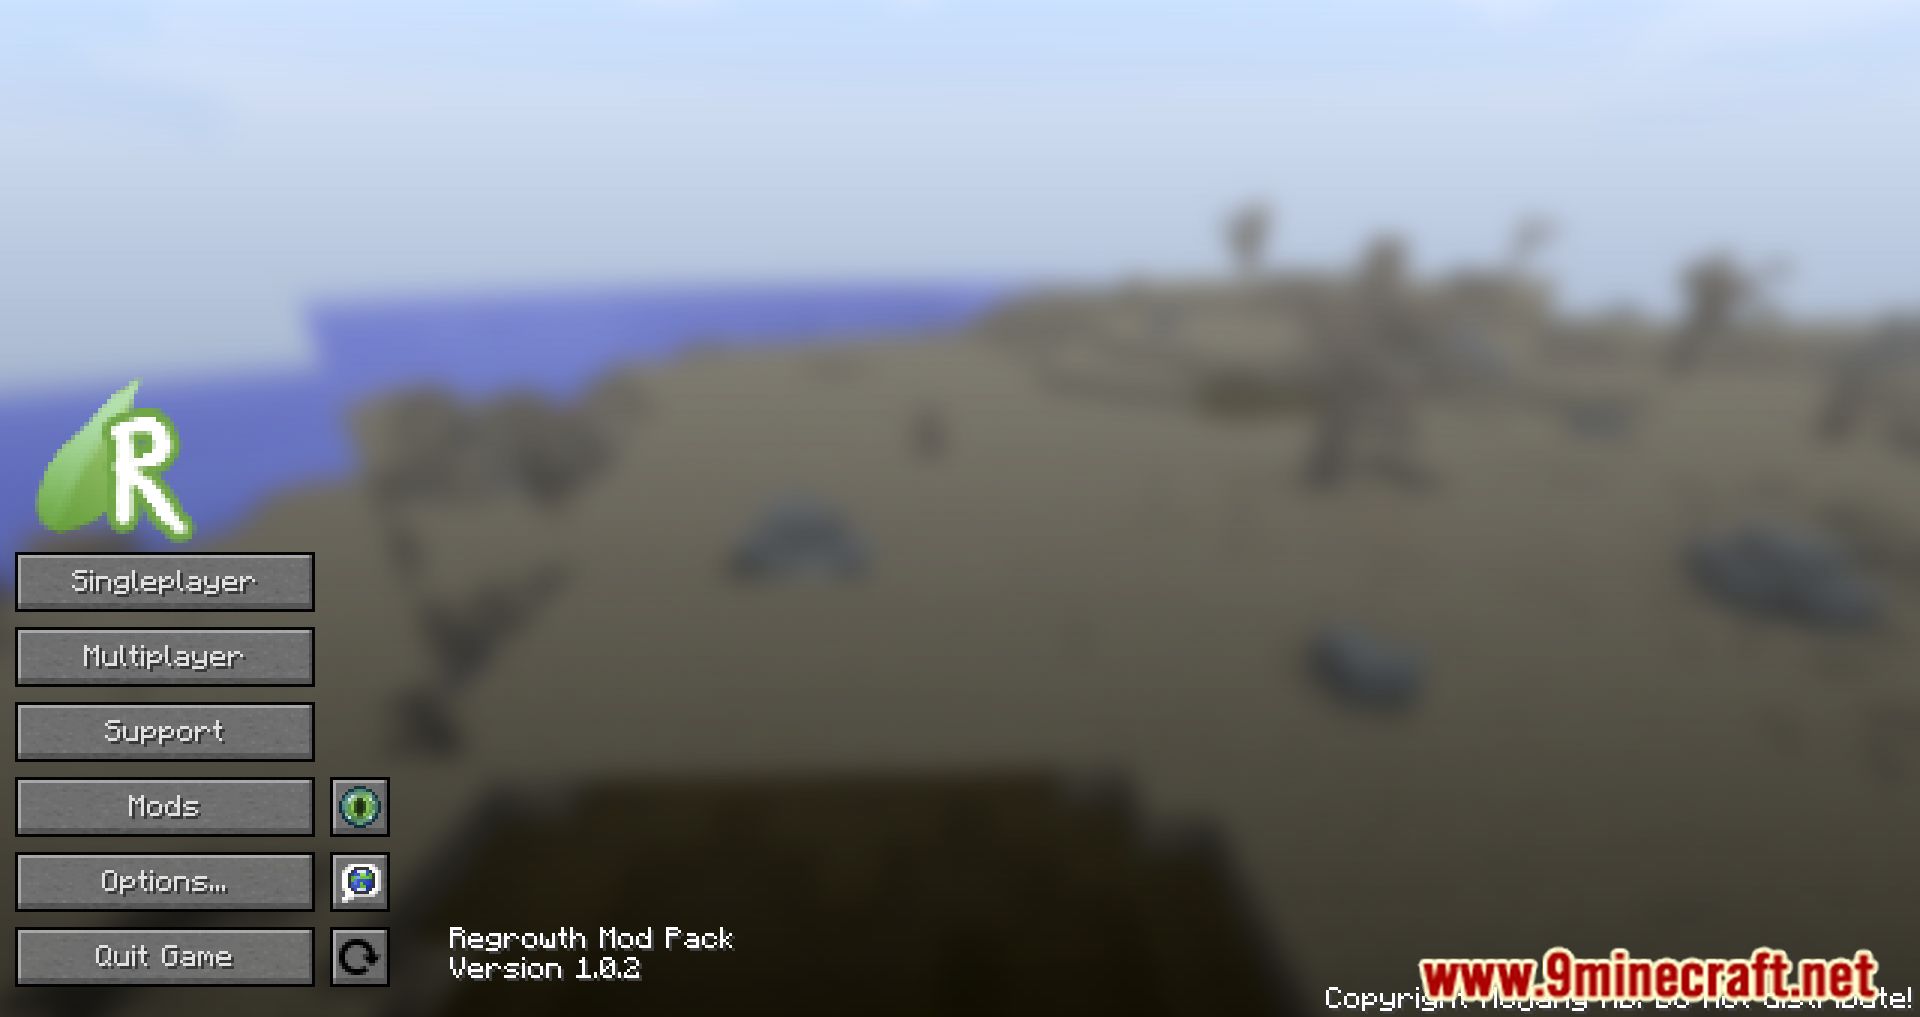 Regrowth Modpack (1.7.10) - Regrowing the Planet Earth 2